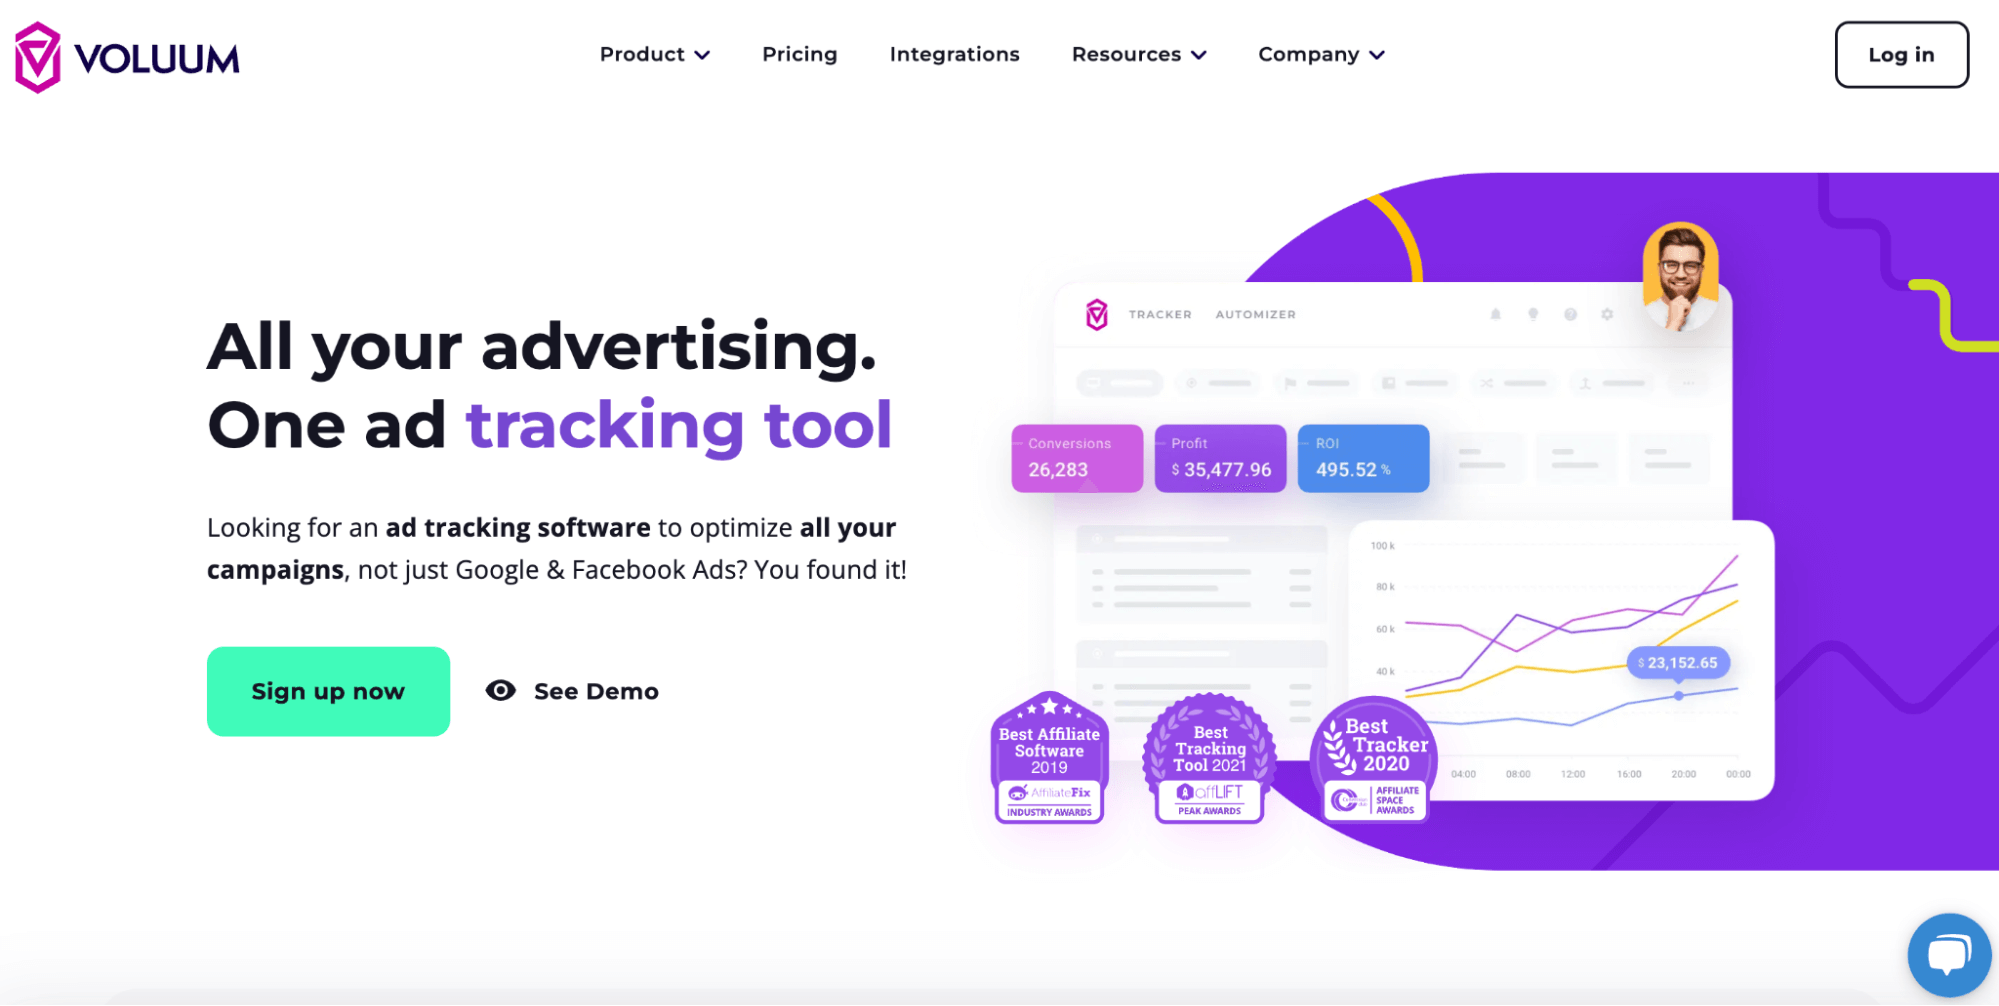 The image displays the homepage for Voluum with a heading, “All your advertising. One ad tracking tool”. The graphic to the right shows an analytics interface and multiple awards that the advertisement, link, click tracker has received.